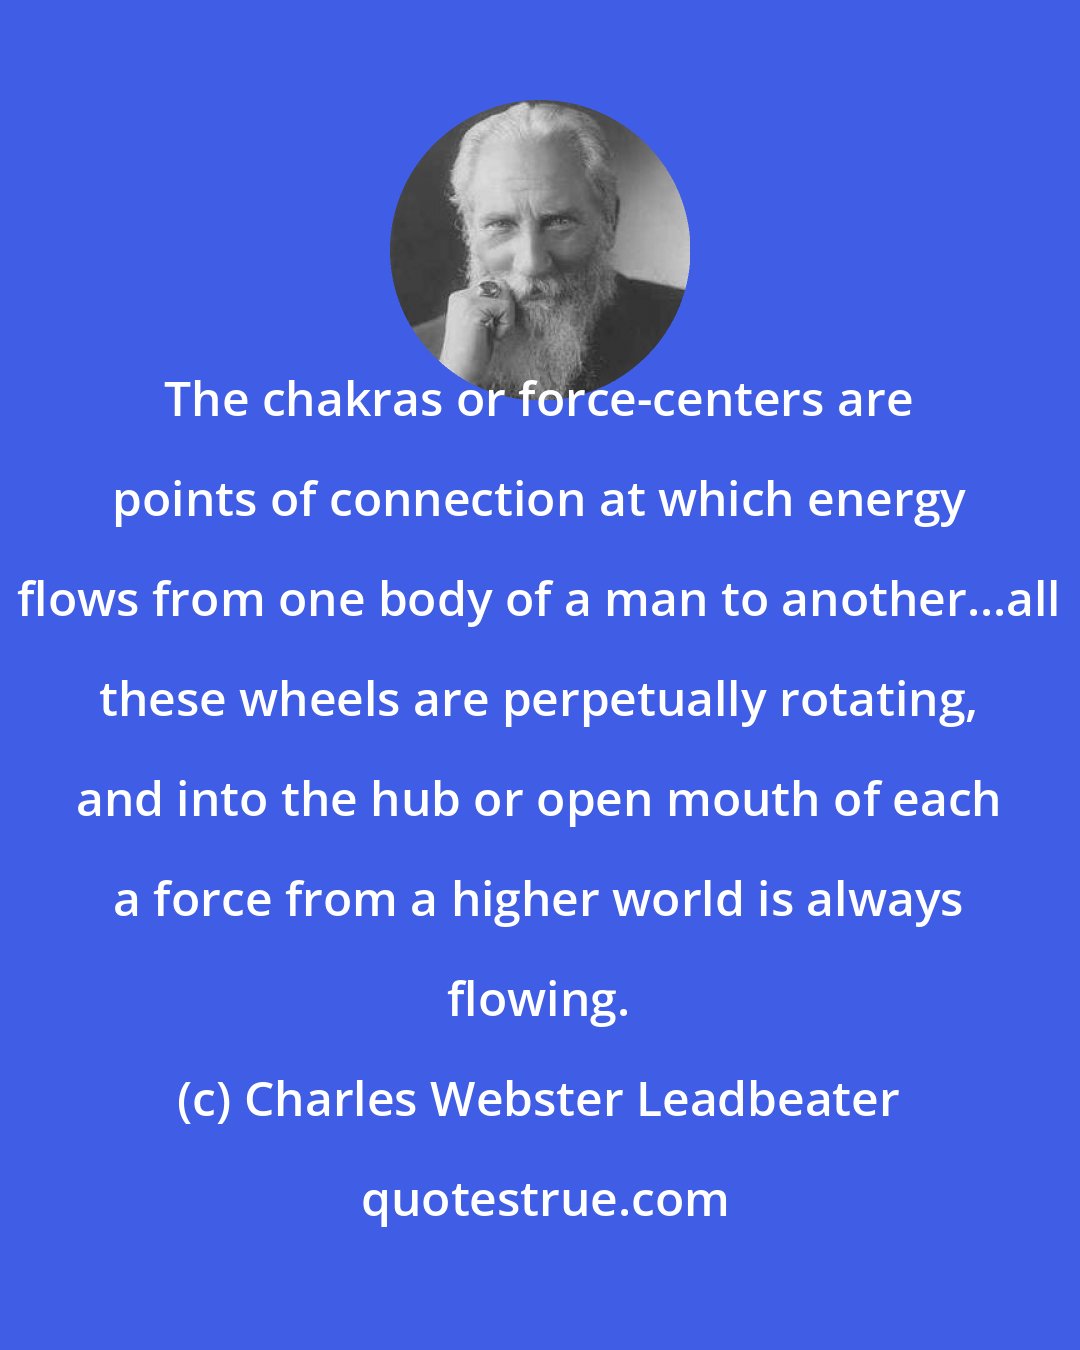 Charles Webster Leadbeater: The chakras or force-centers are points of connection at which energy flows from one body of a man to another...all these wheels are perpetually rotating, and into the hub or open mouth of each a force from a higher world is always flowing.